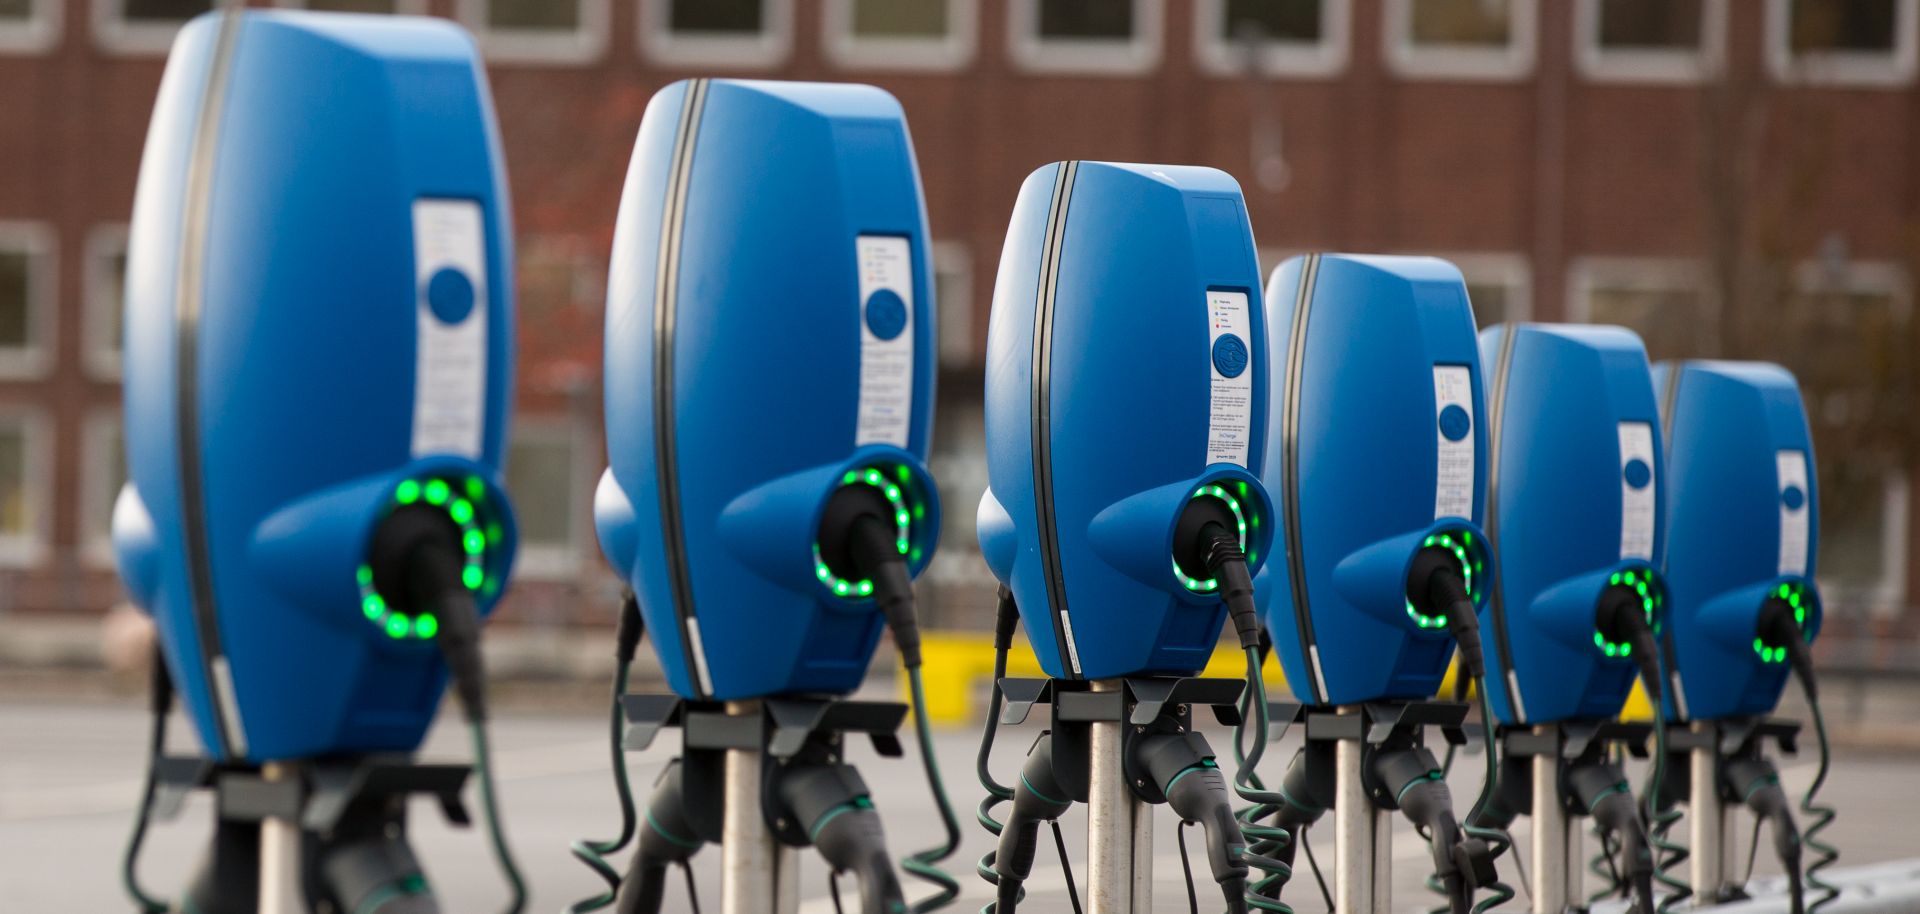 This image shows charging stations for electric cars in Gothenburg, Sweden, on Oct. 19, 2019.